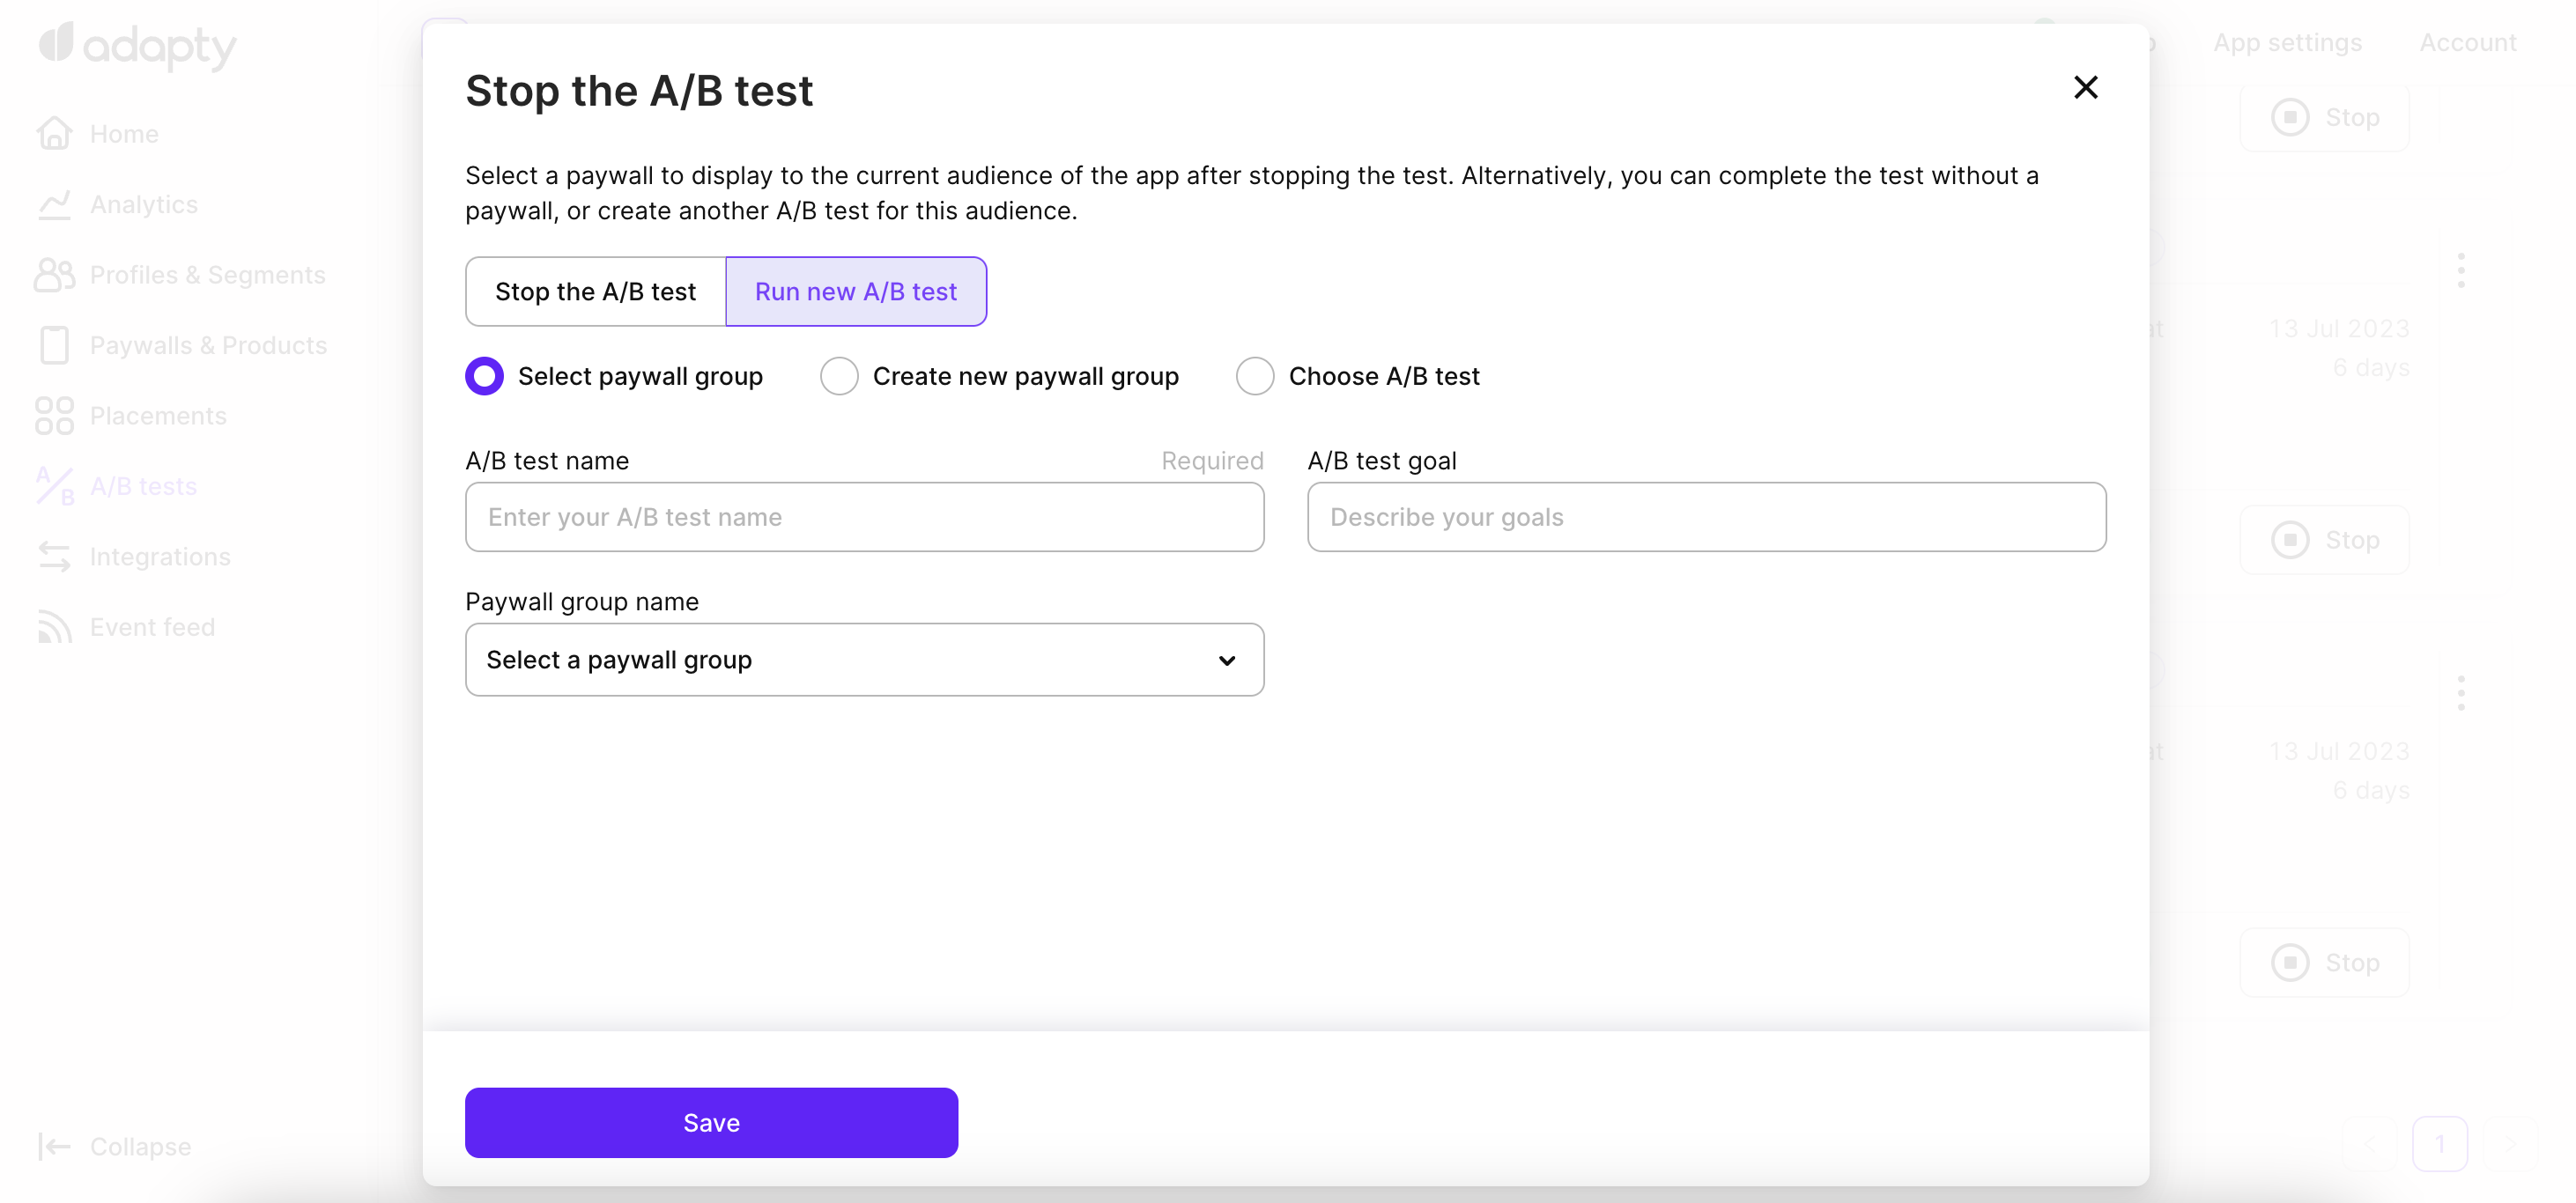 Run new A/B test when stopping 